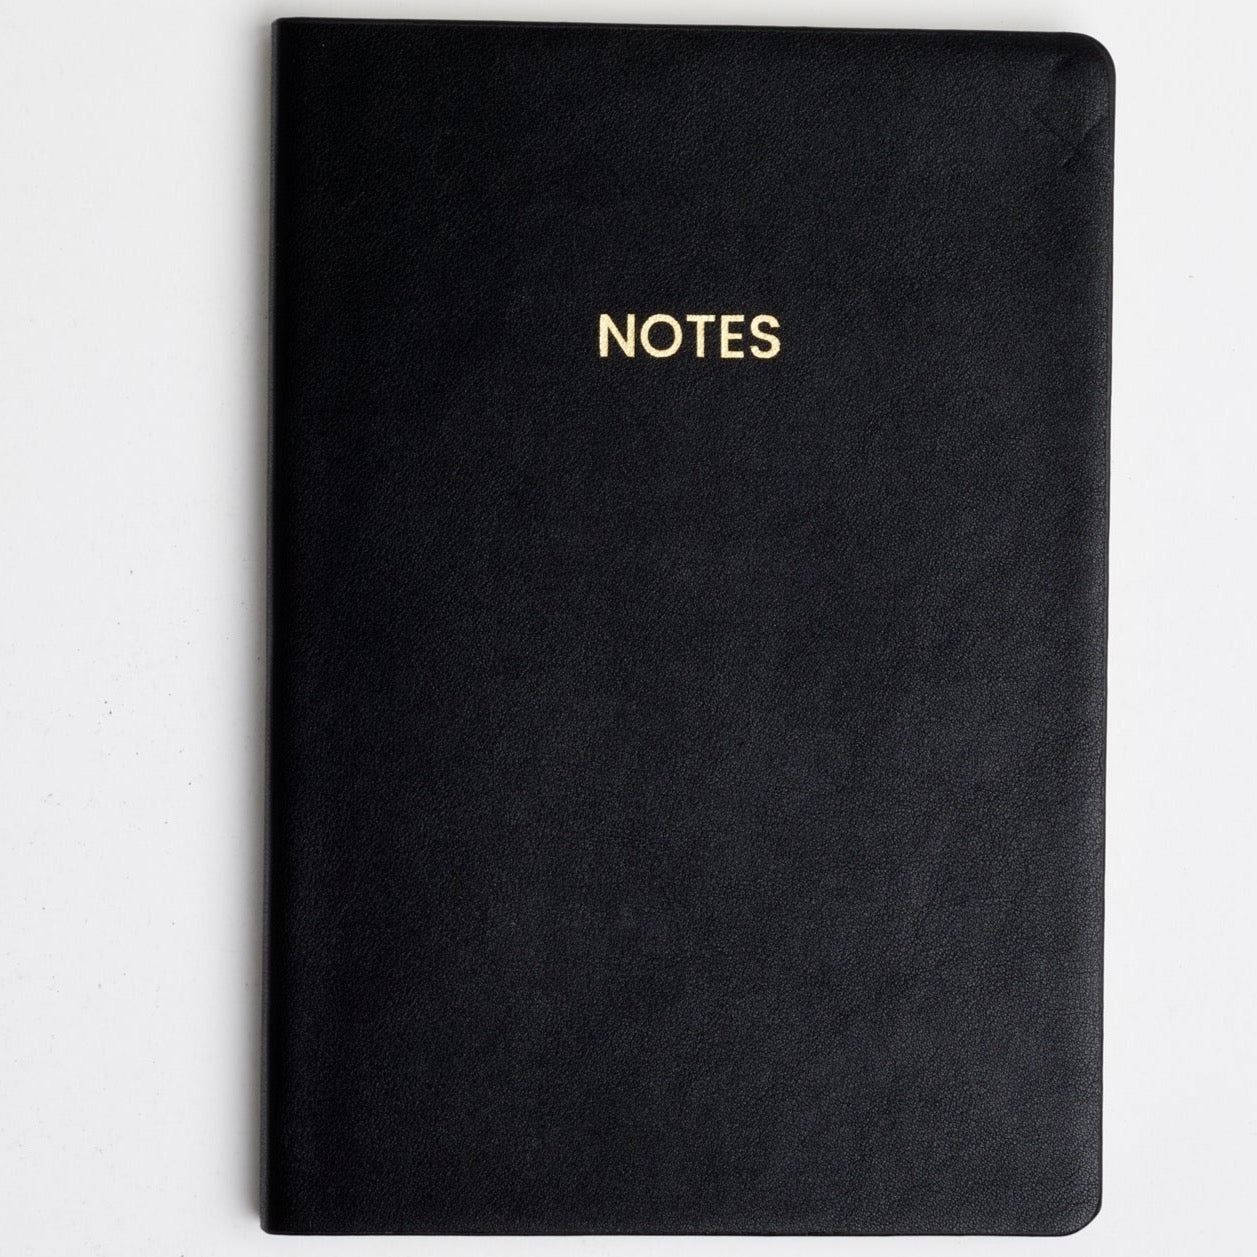 A black colored vegan leather notebook with gold foil text reading &quot;NOTES&quot; across the front photographed against a white background.